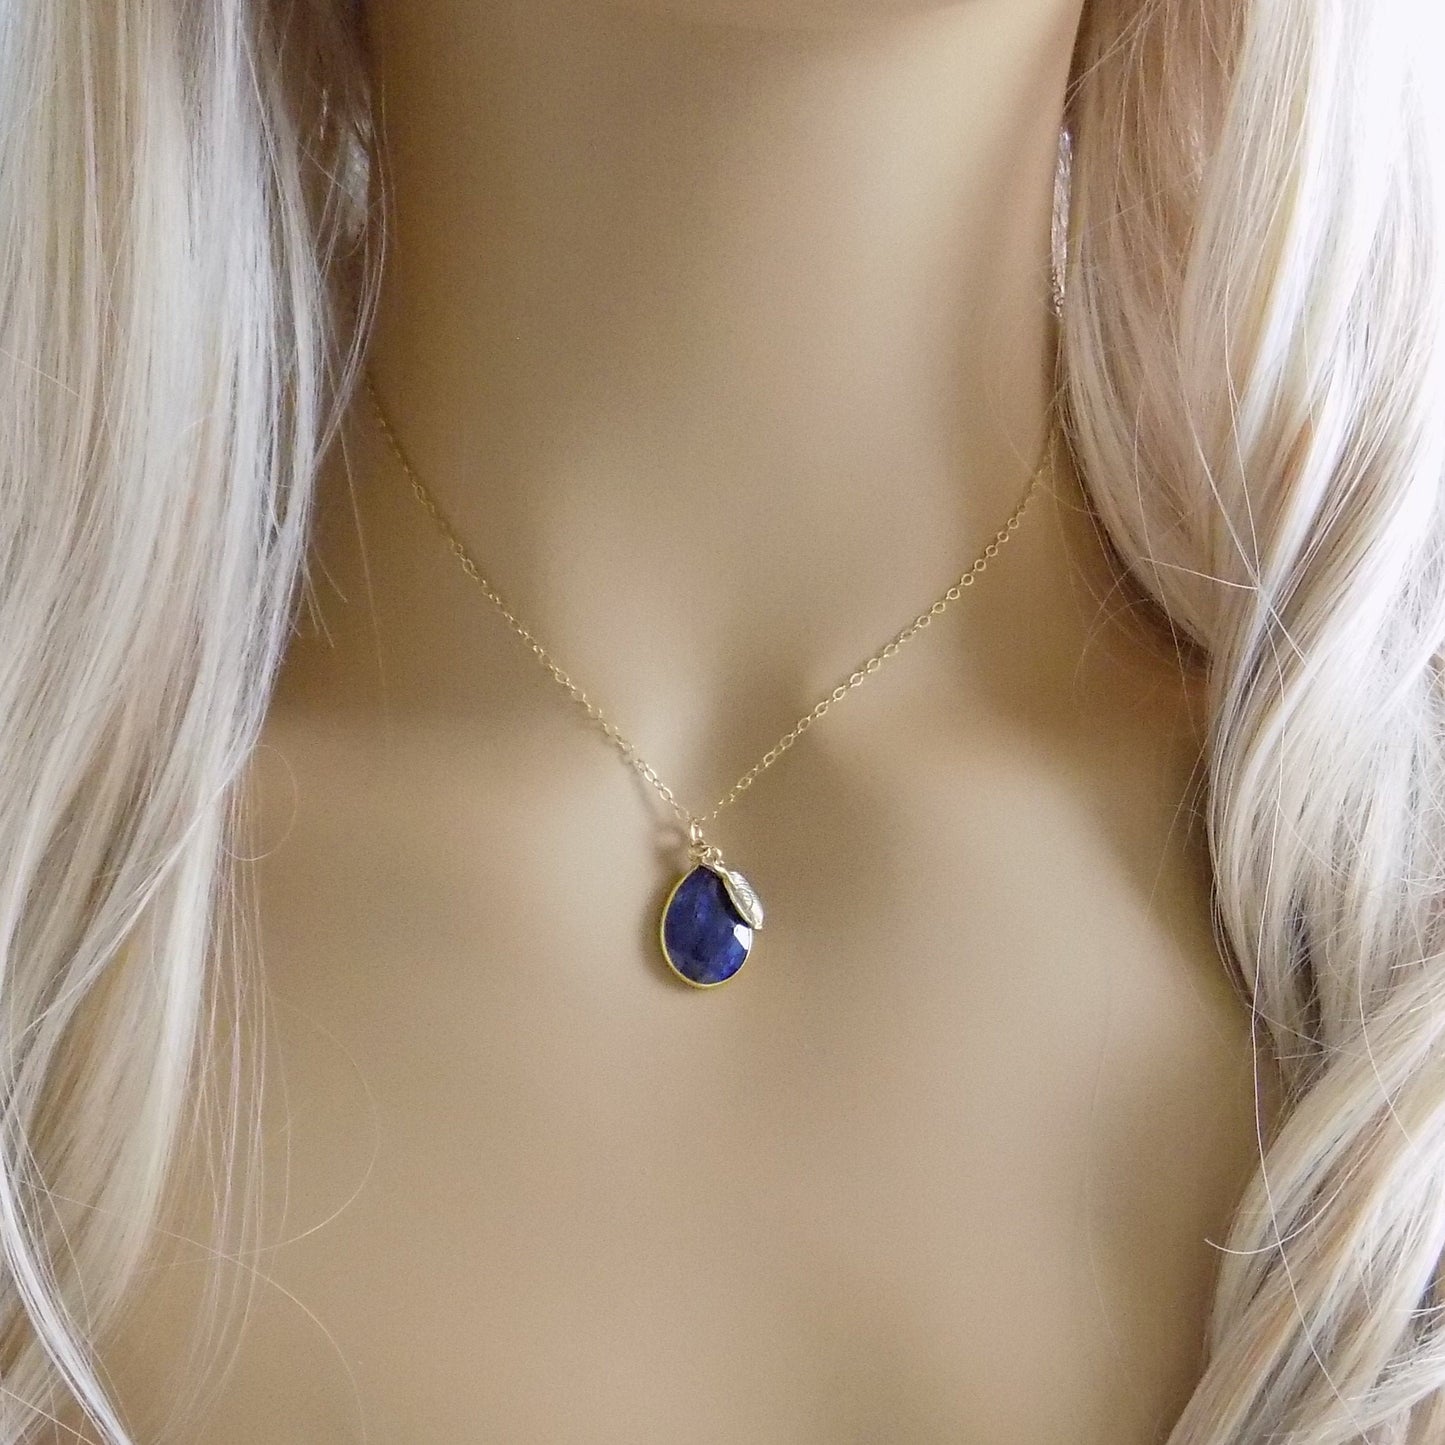 Bridesmaid Gift - Sapphire Necklace Personalized